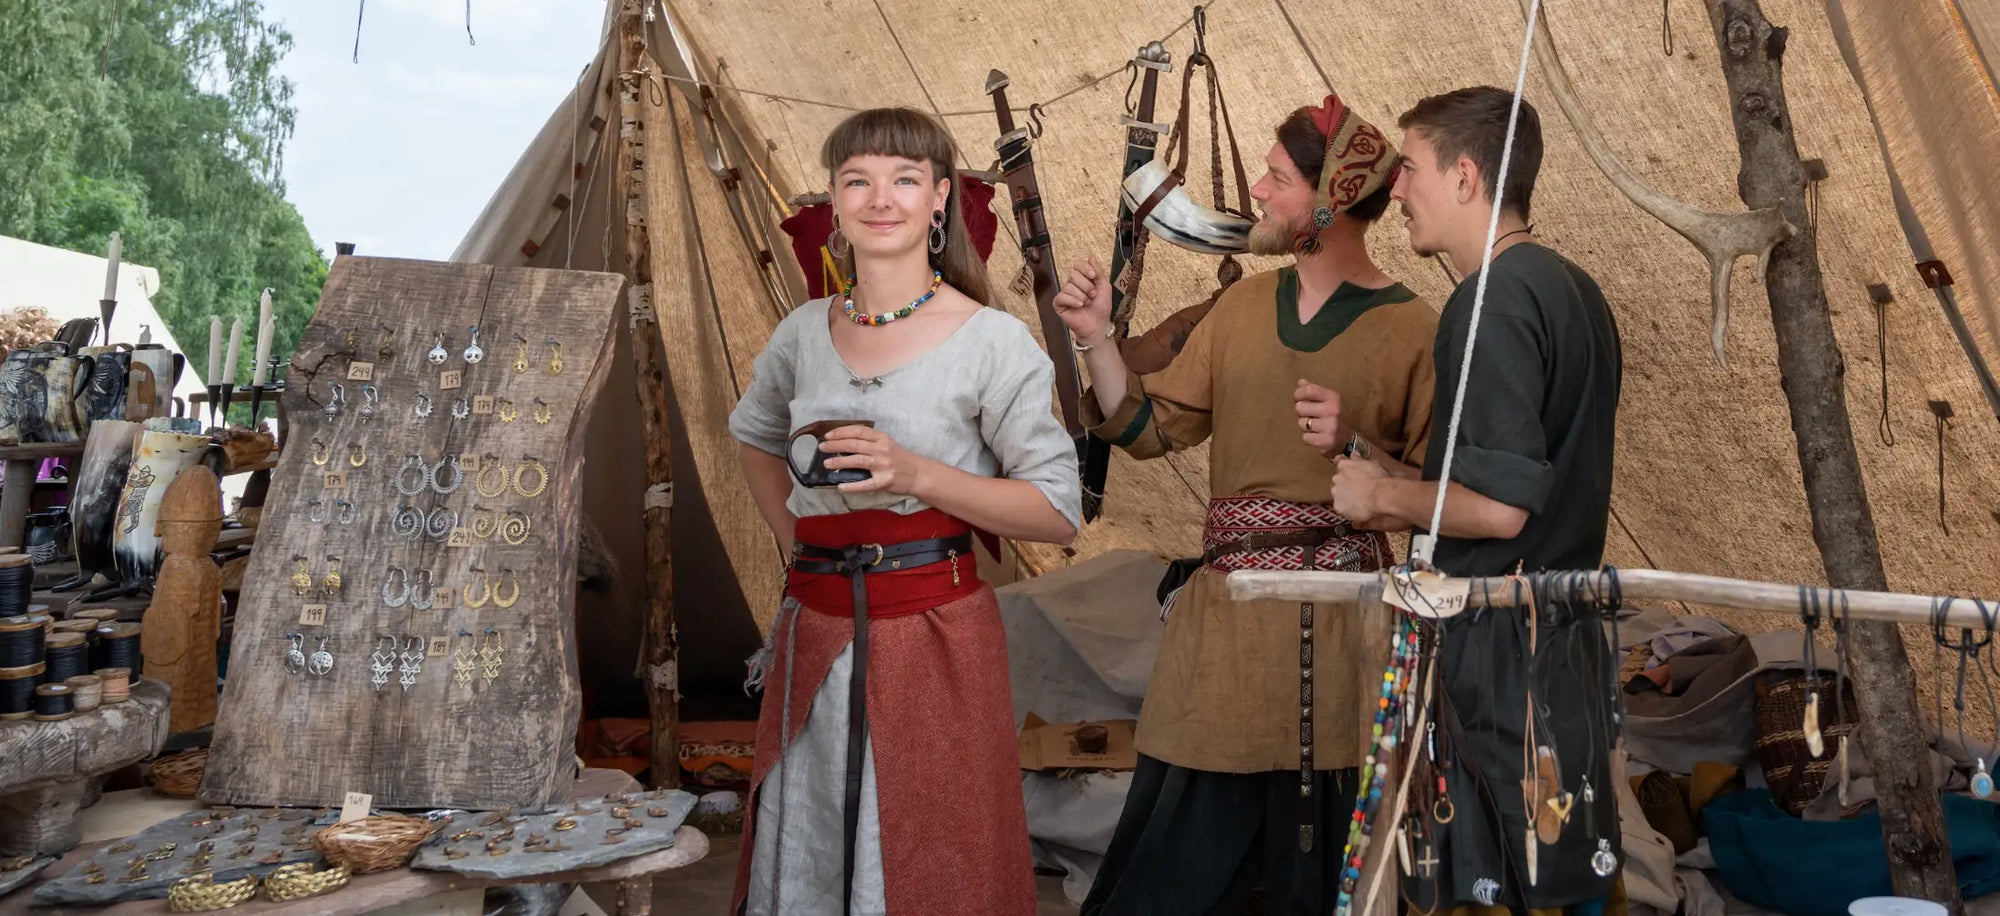 A modern day female Viking enthusiast stands wearing Viking dress in a Norse themed village. She is standing next to a woman Viking jewelry display stand